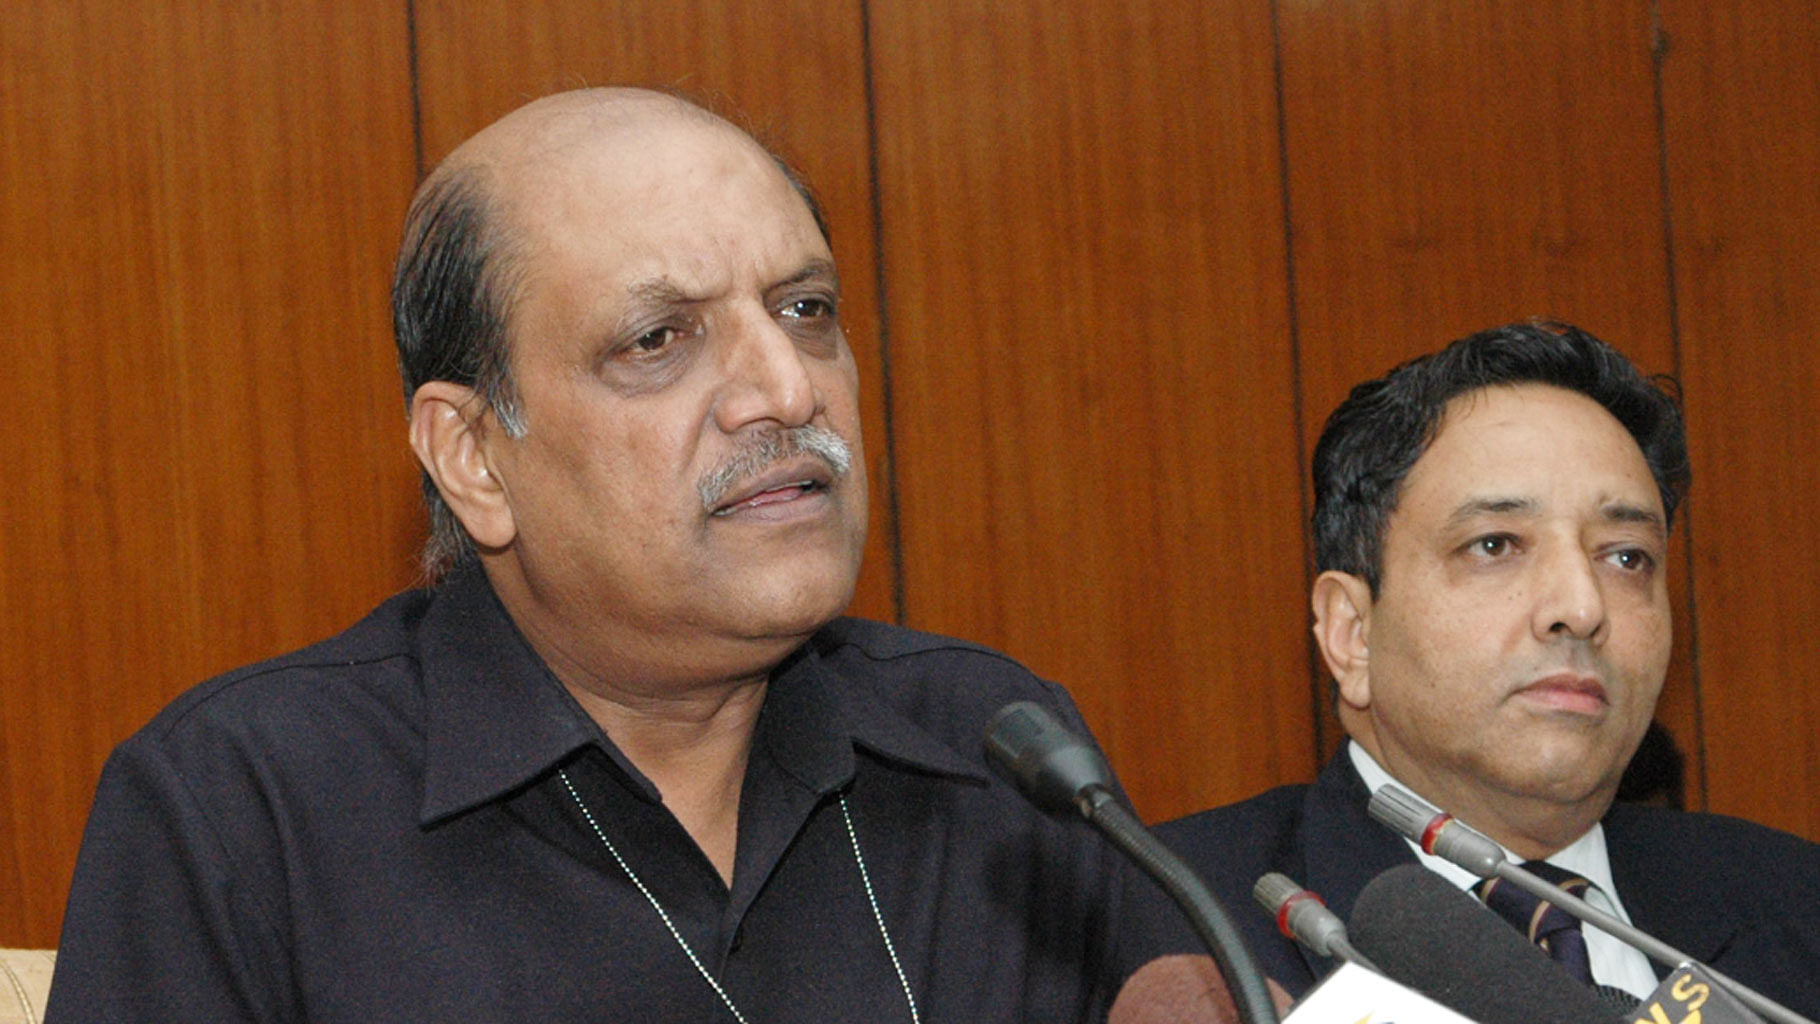 Former Home Secretary Madhukar Gupta at a press briefing in Delhi on 18 August 2008. (Photo Courtesy: <a href="http://photodivision.gov.in/IntroPhotodetails.asp?thisPage=474">GoI Photo Division</a>)